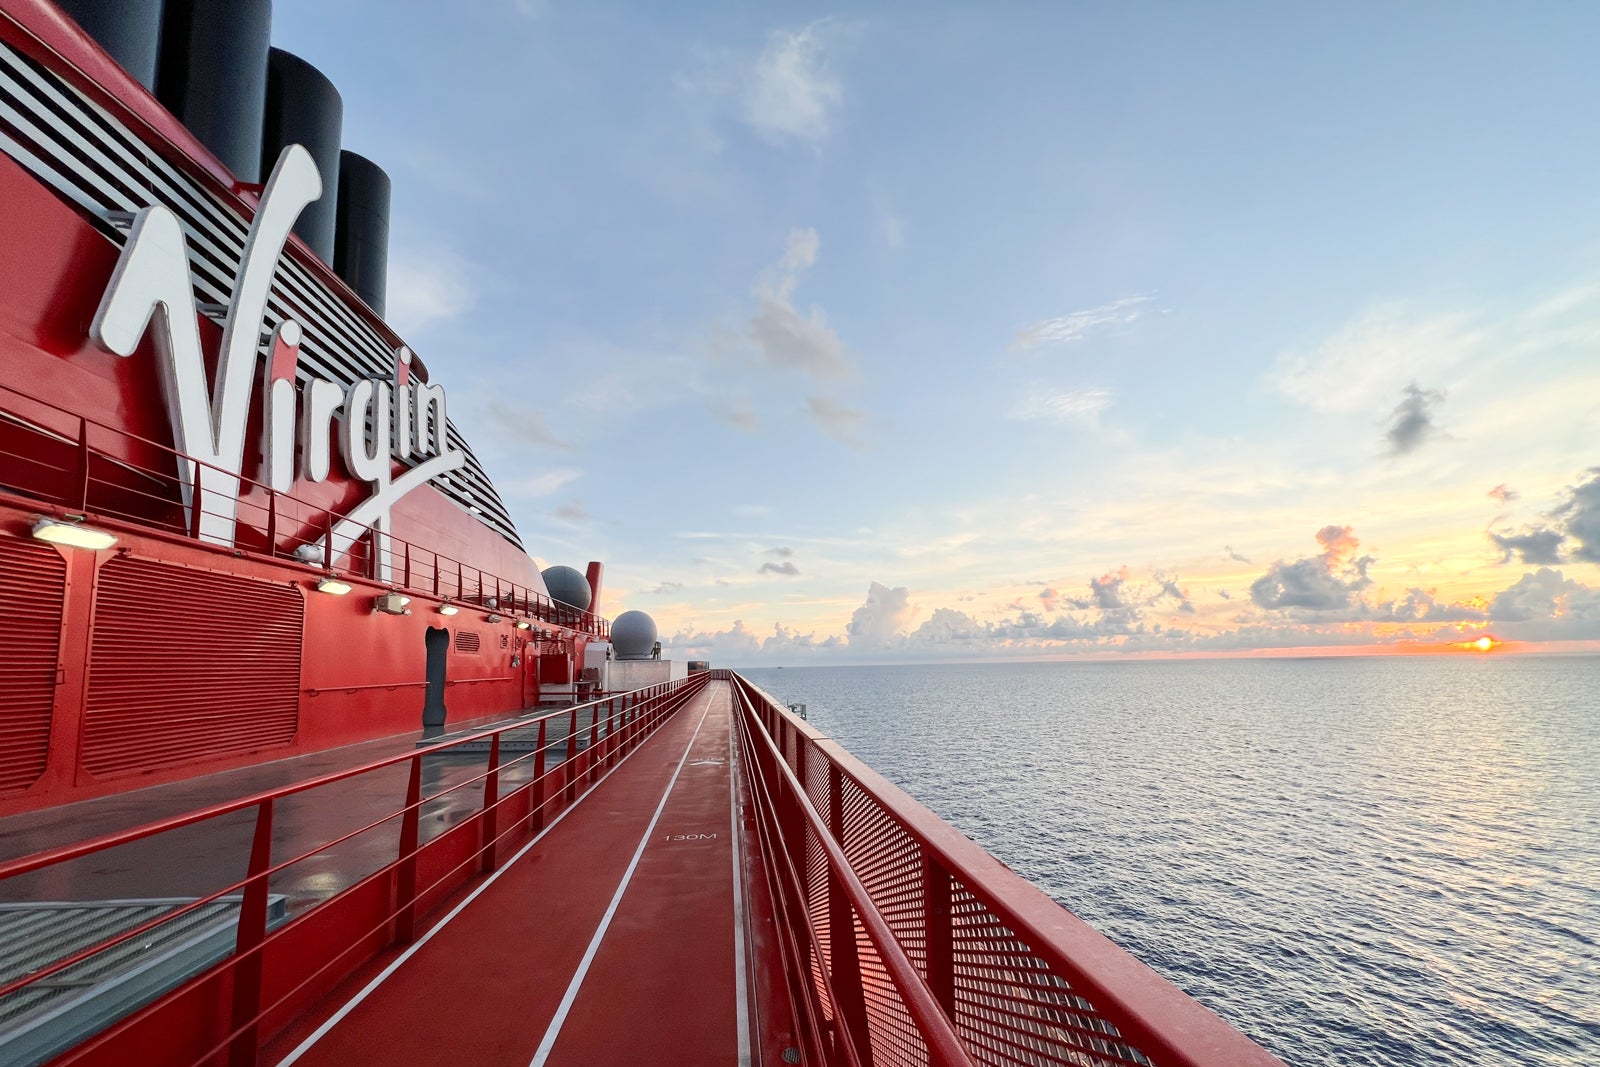 Starboard Cruise Services recruits Virgin Voyages exec - LATTE